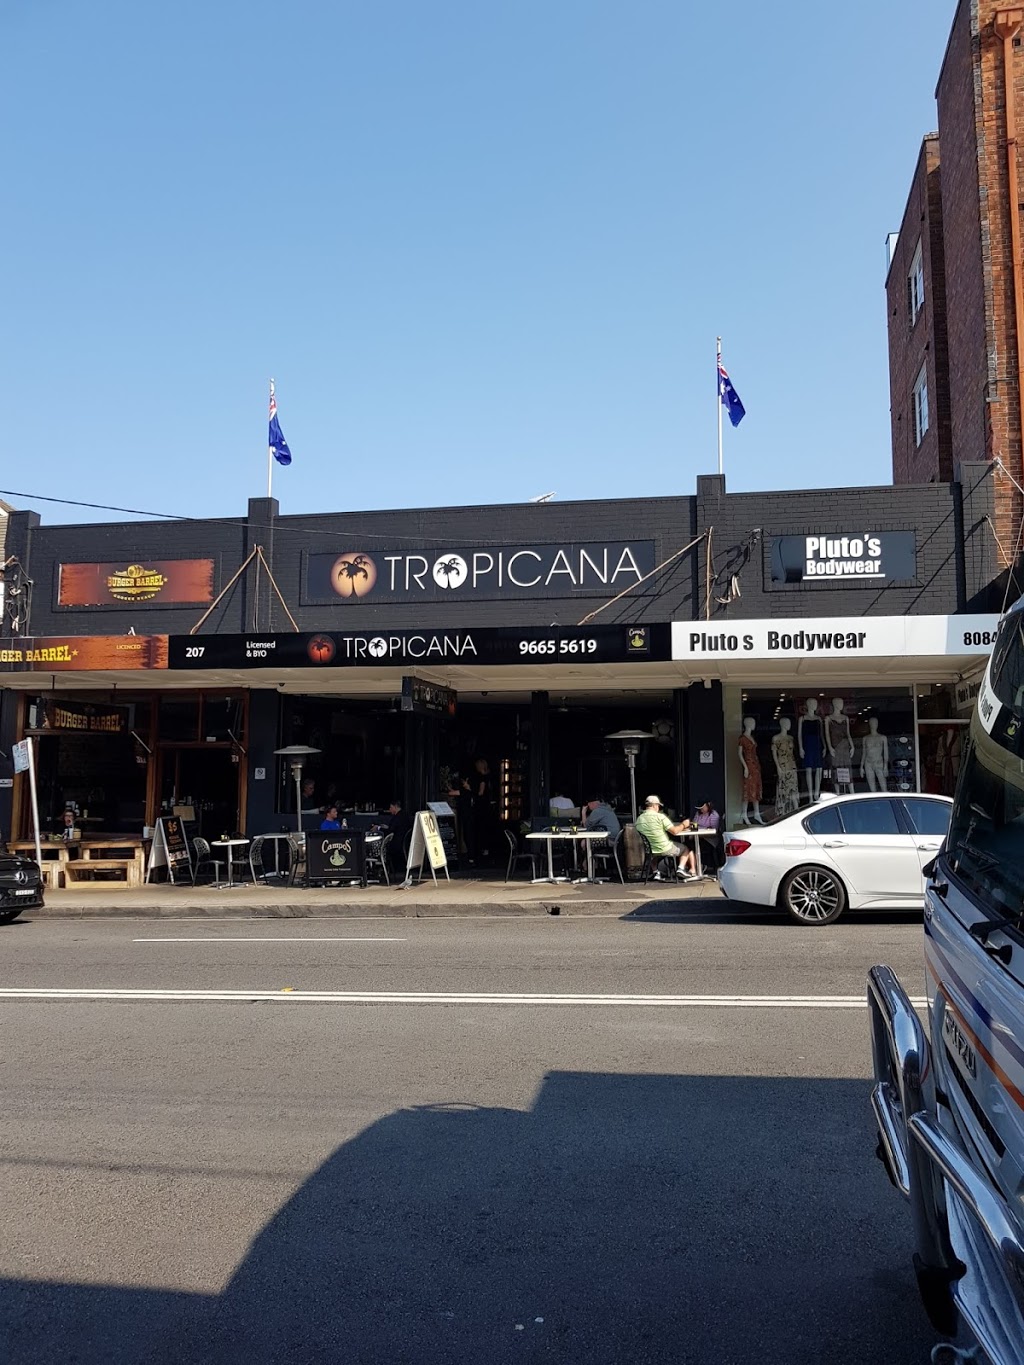 Tropicana Cafe | cafe | 207 Coogee Bay Rd, Coogee NSW 2034, Australia | 0296655619 OR +61 2 9665 5619